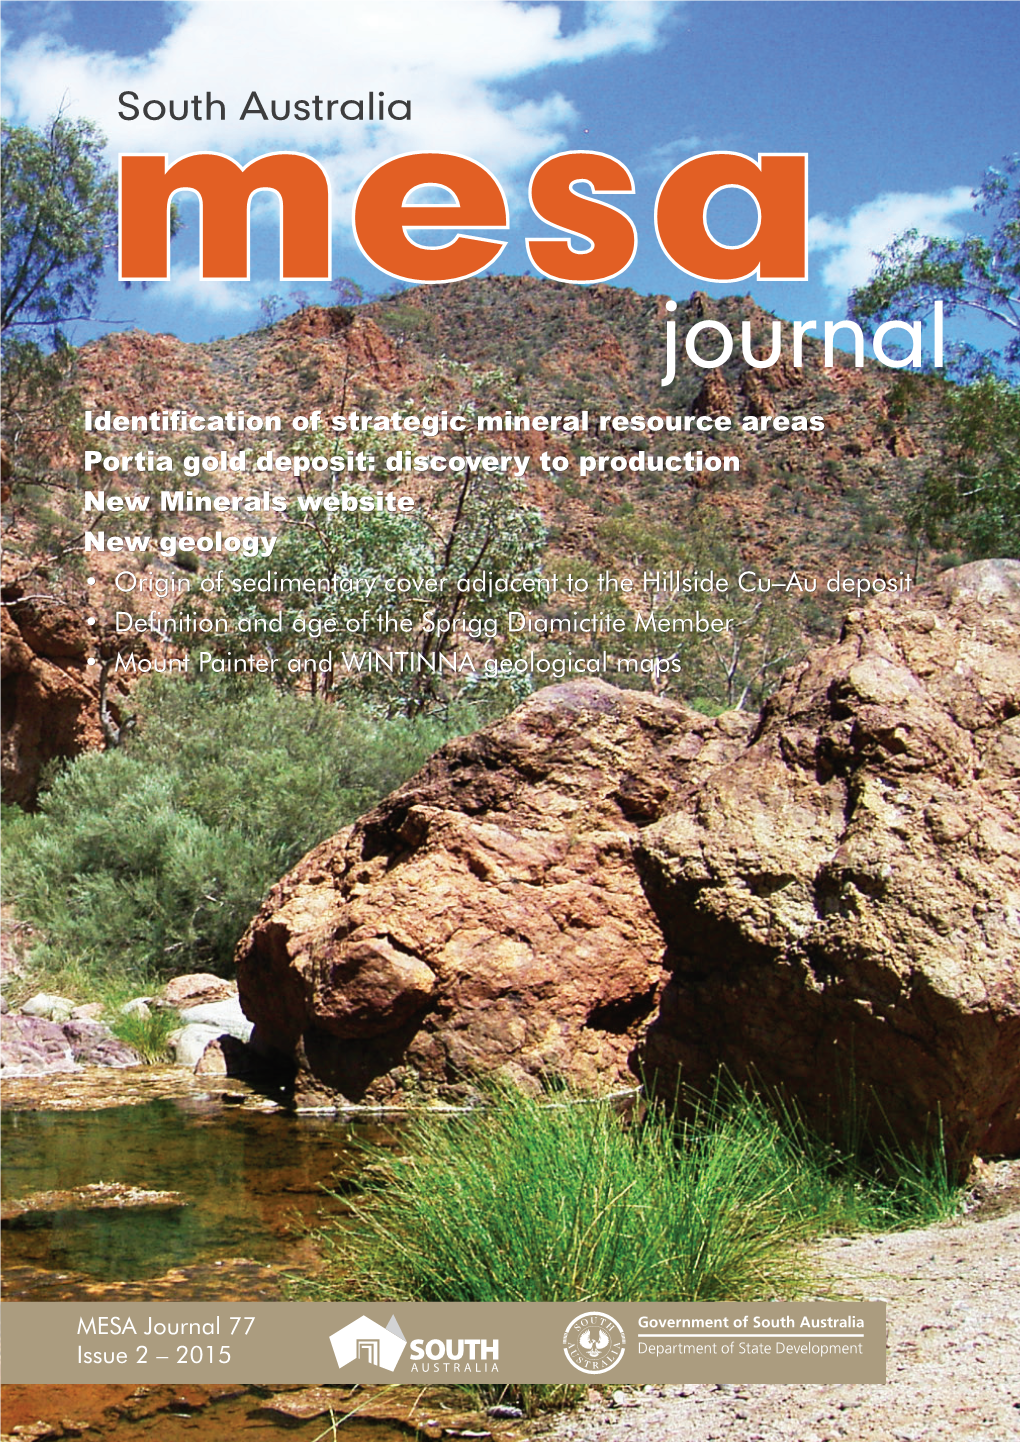 MESA Journal 77 Issue 2 – 2015 Minister’S Message